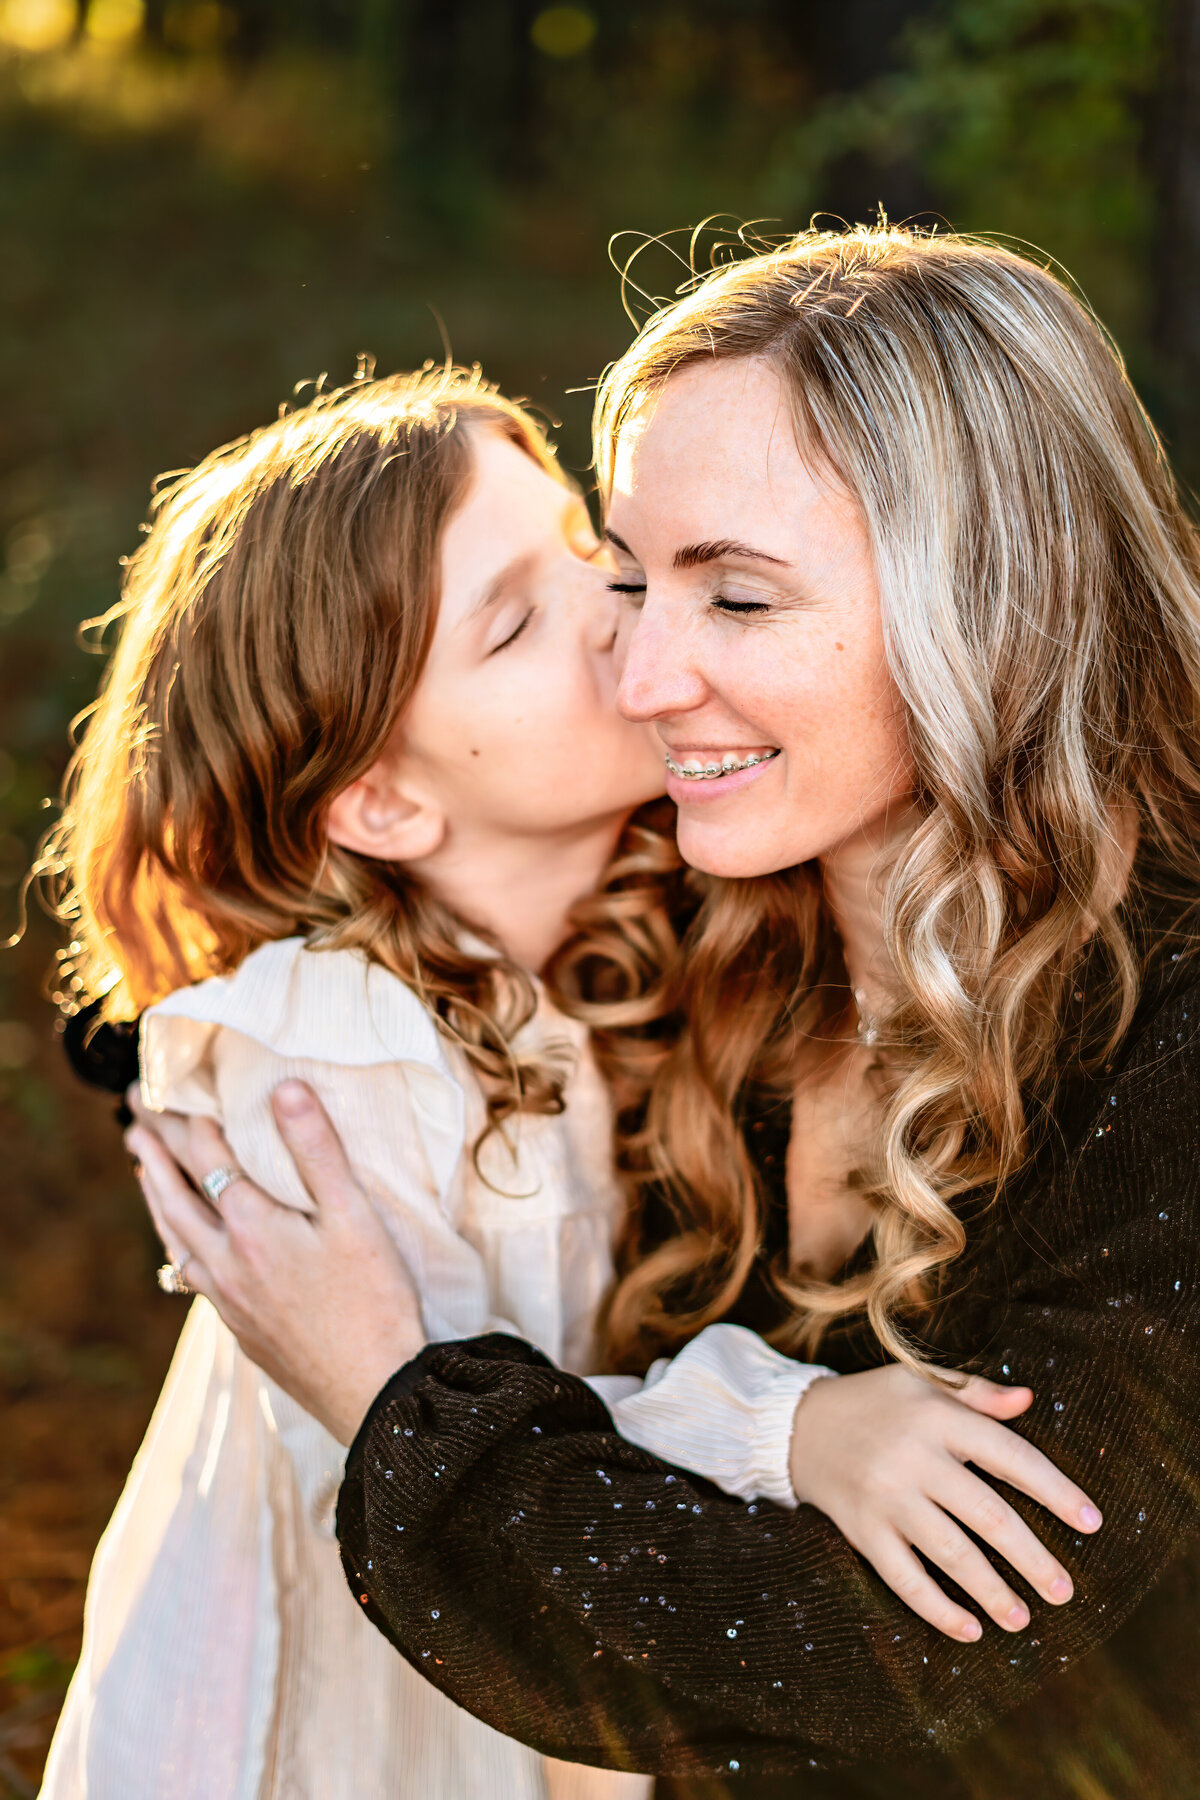 Daughter kissing mother on the cheek at sunset